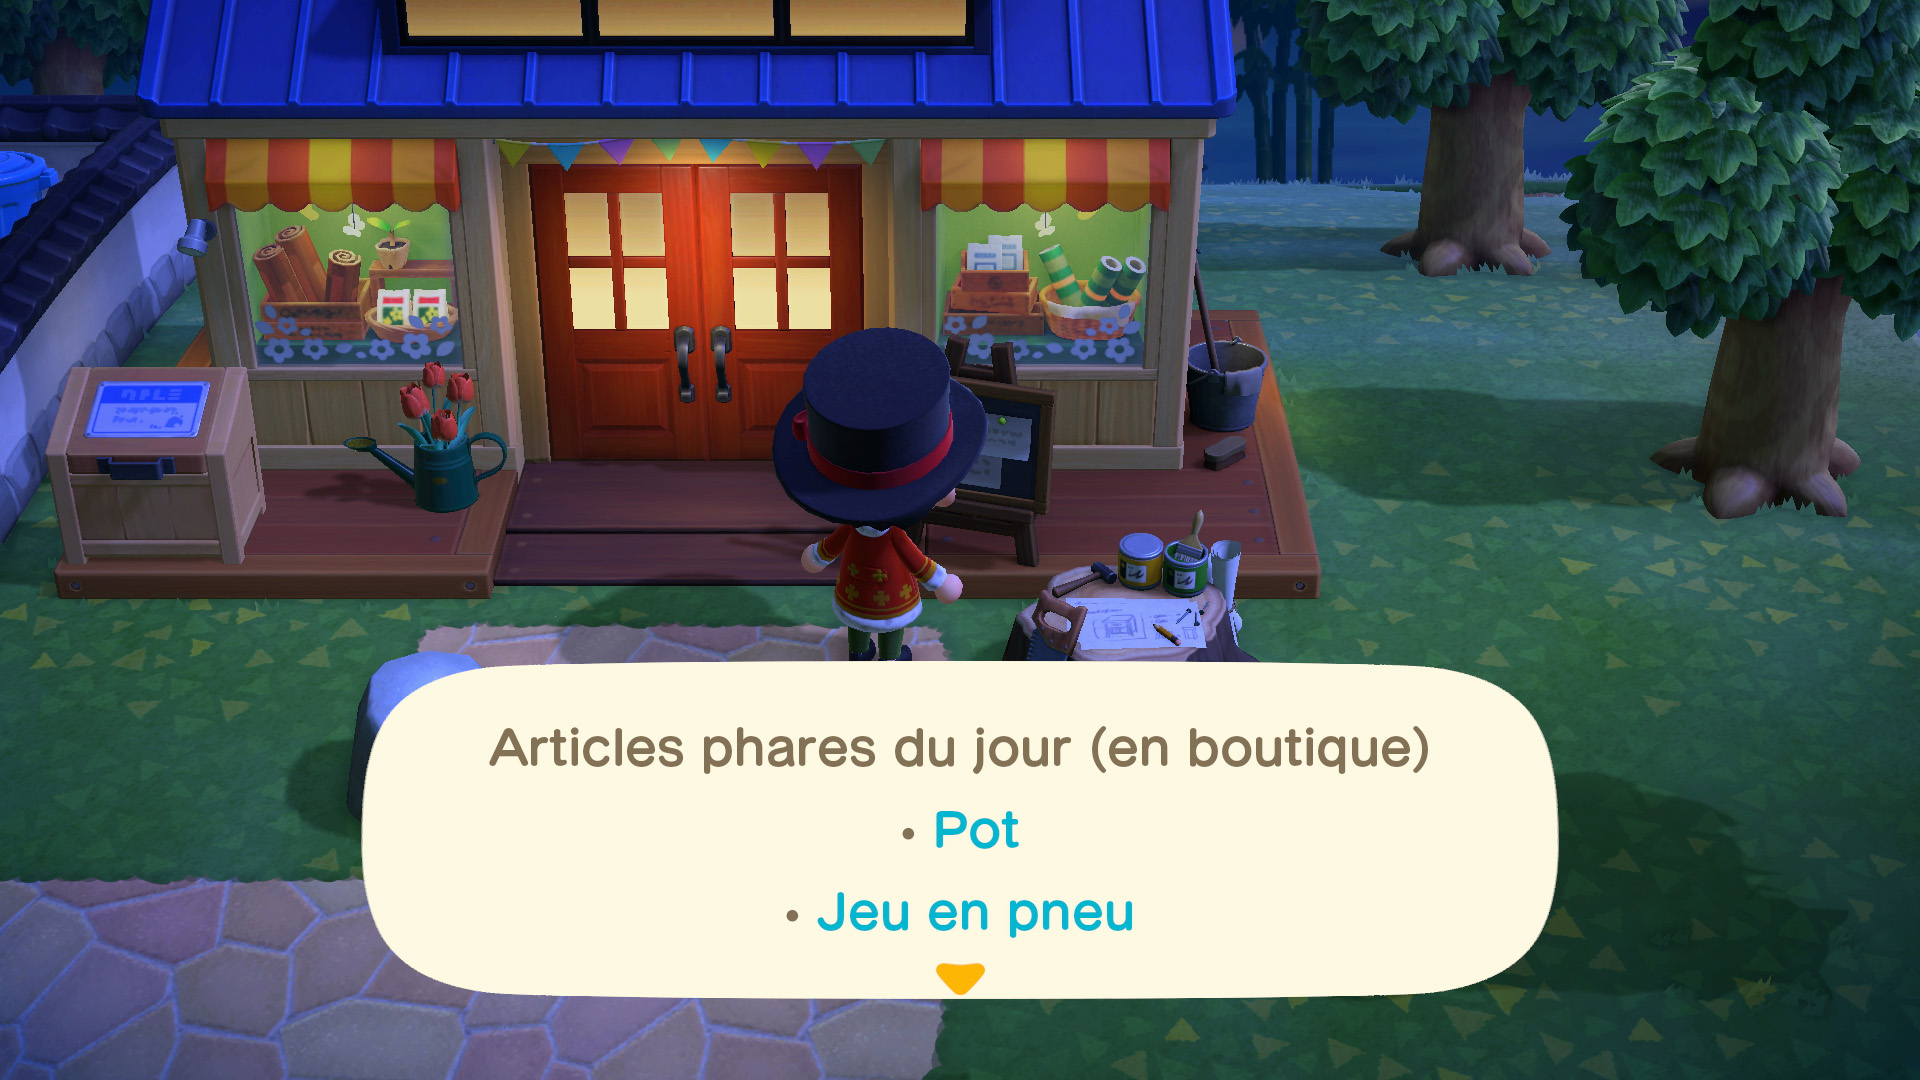 Guide des clochettes - animal crossing new horizons